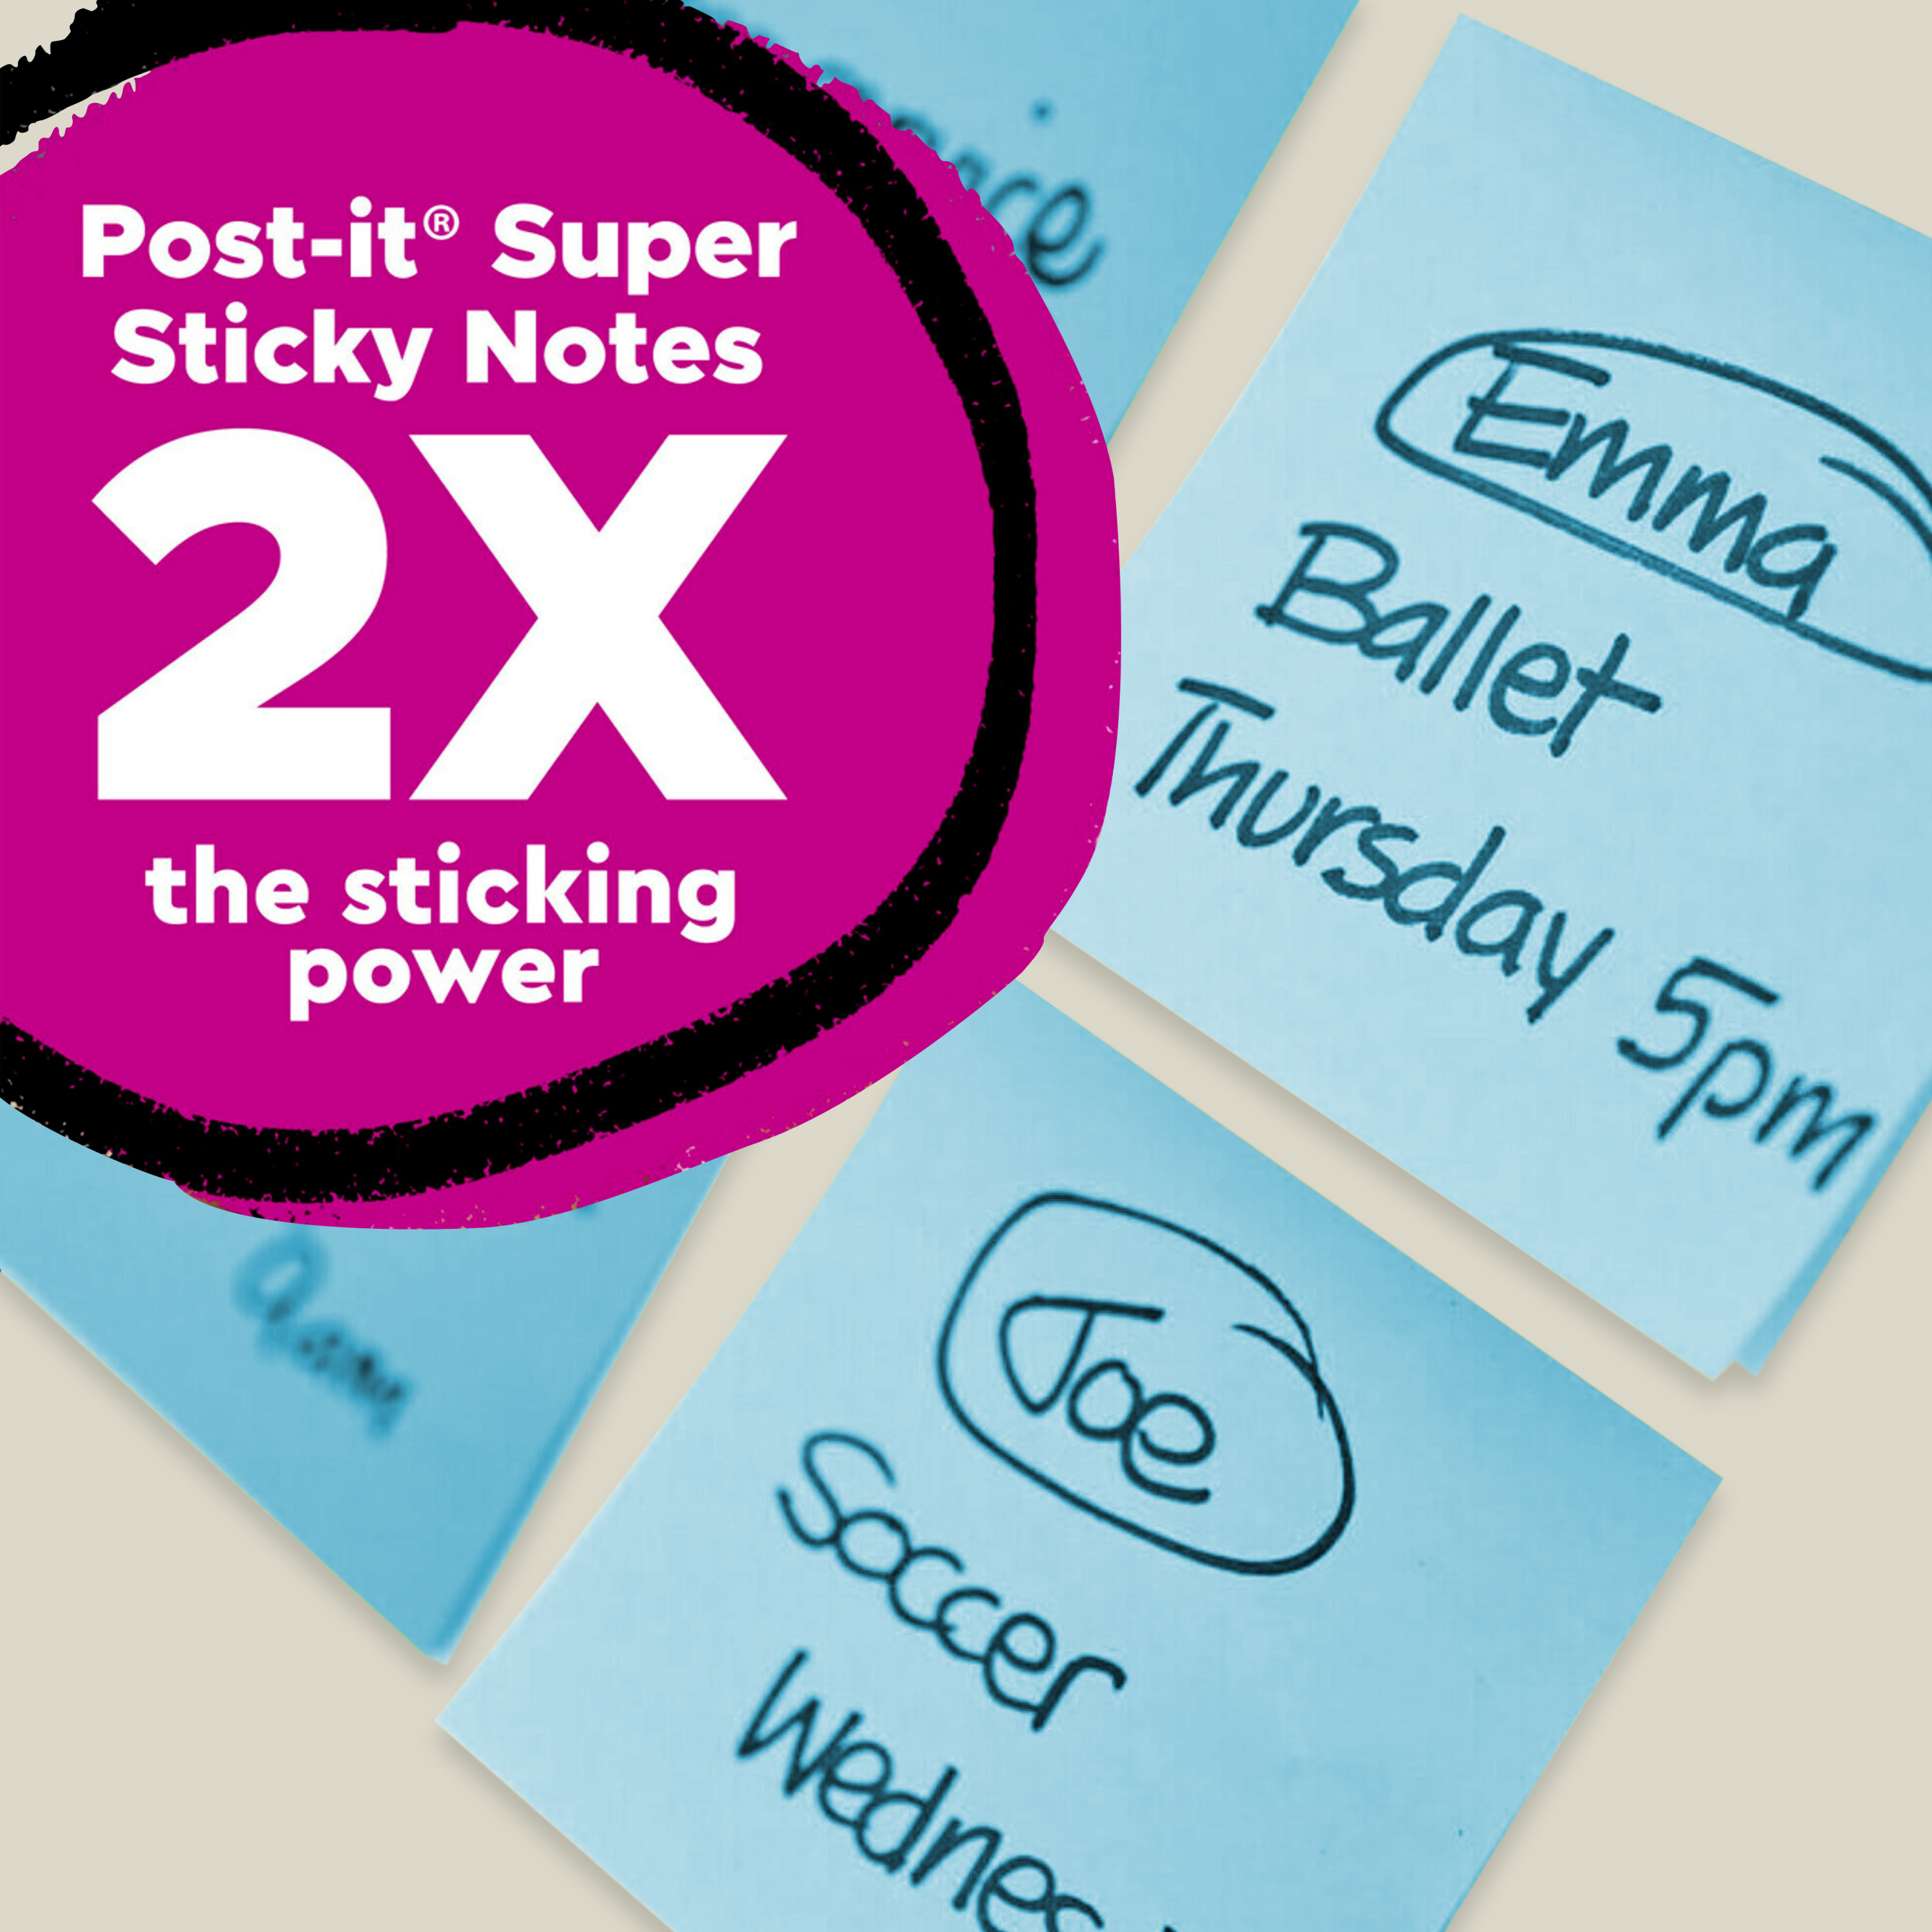 Product Number 654R-5SST | Post-it® Super Sticky Recycled Notes 654R-5SST